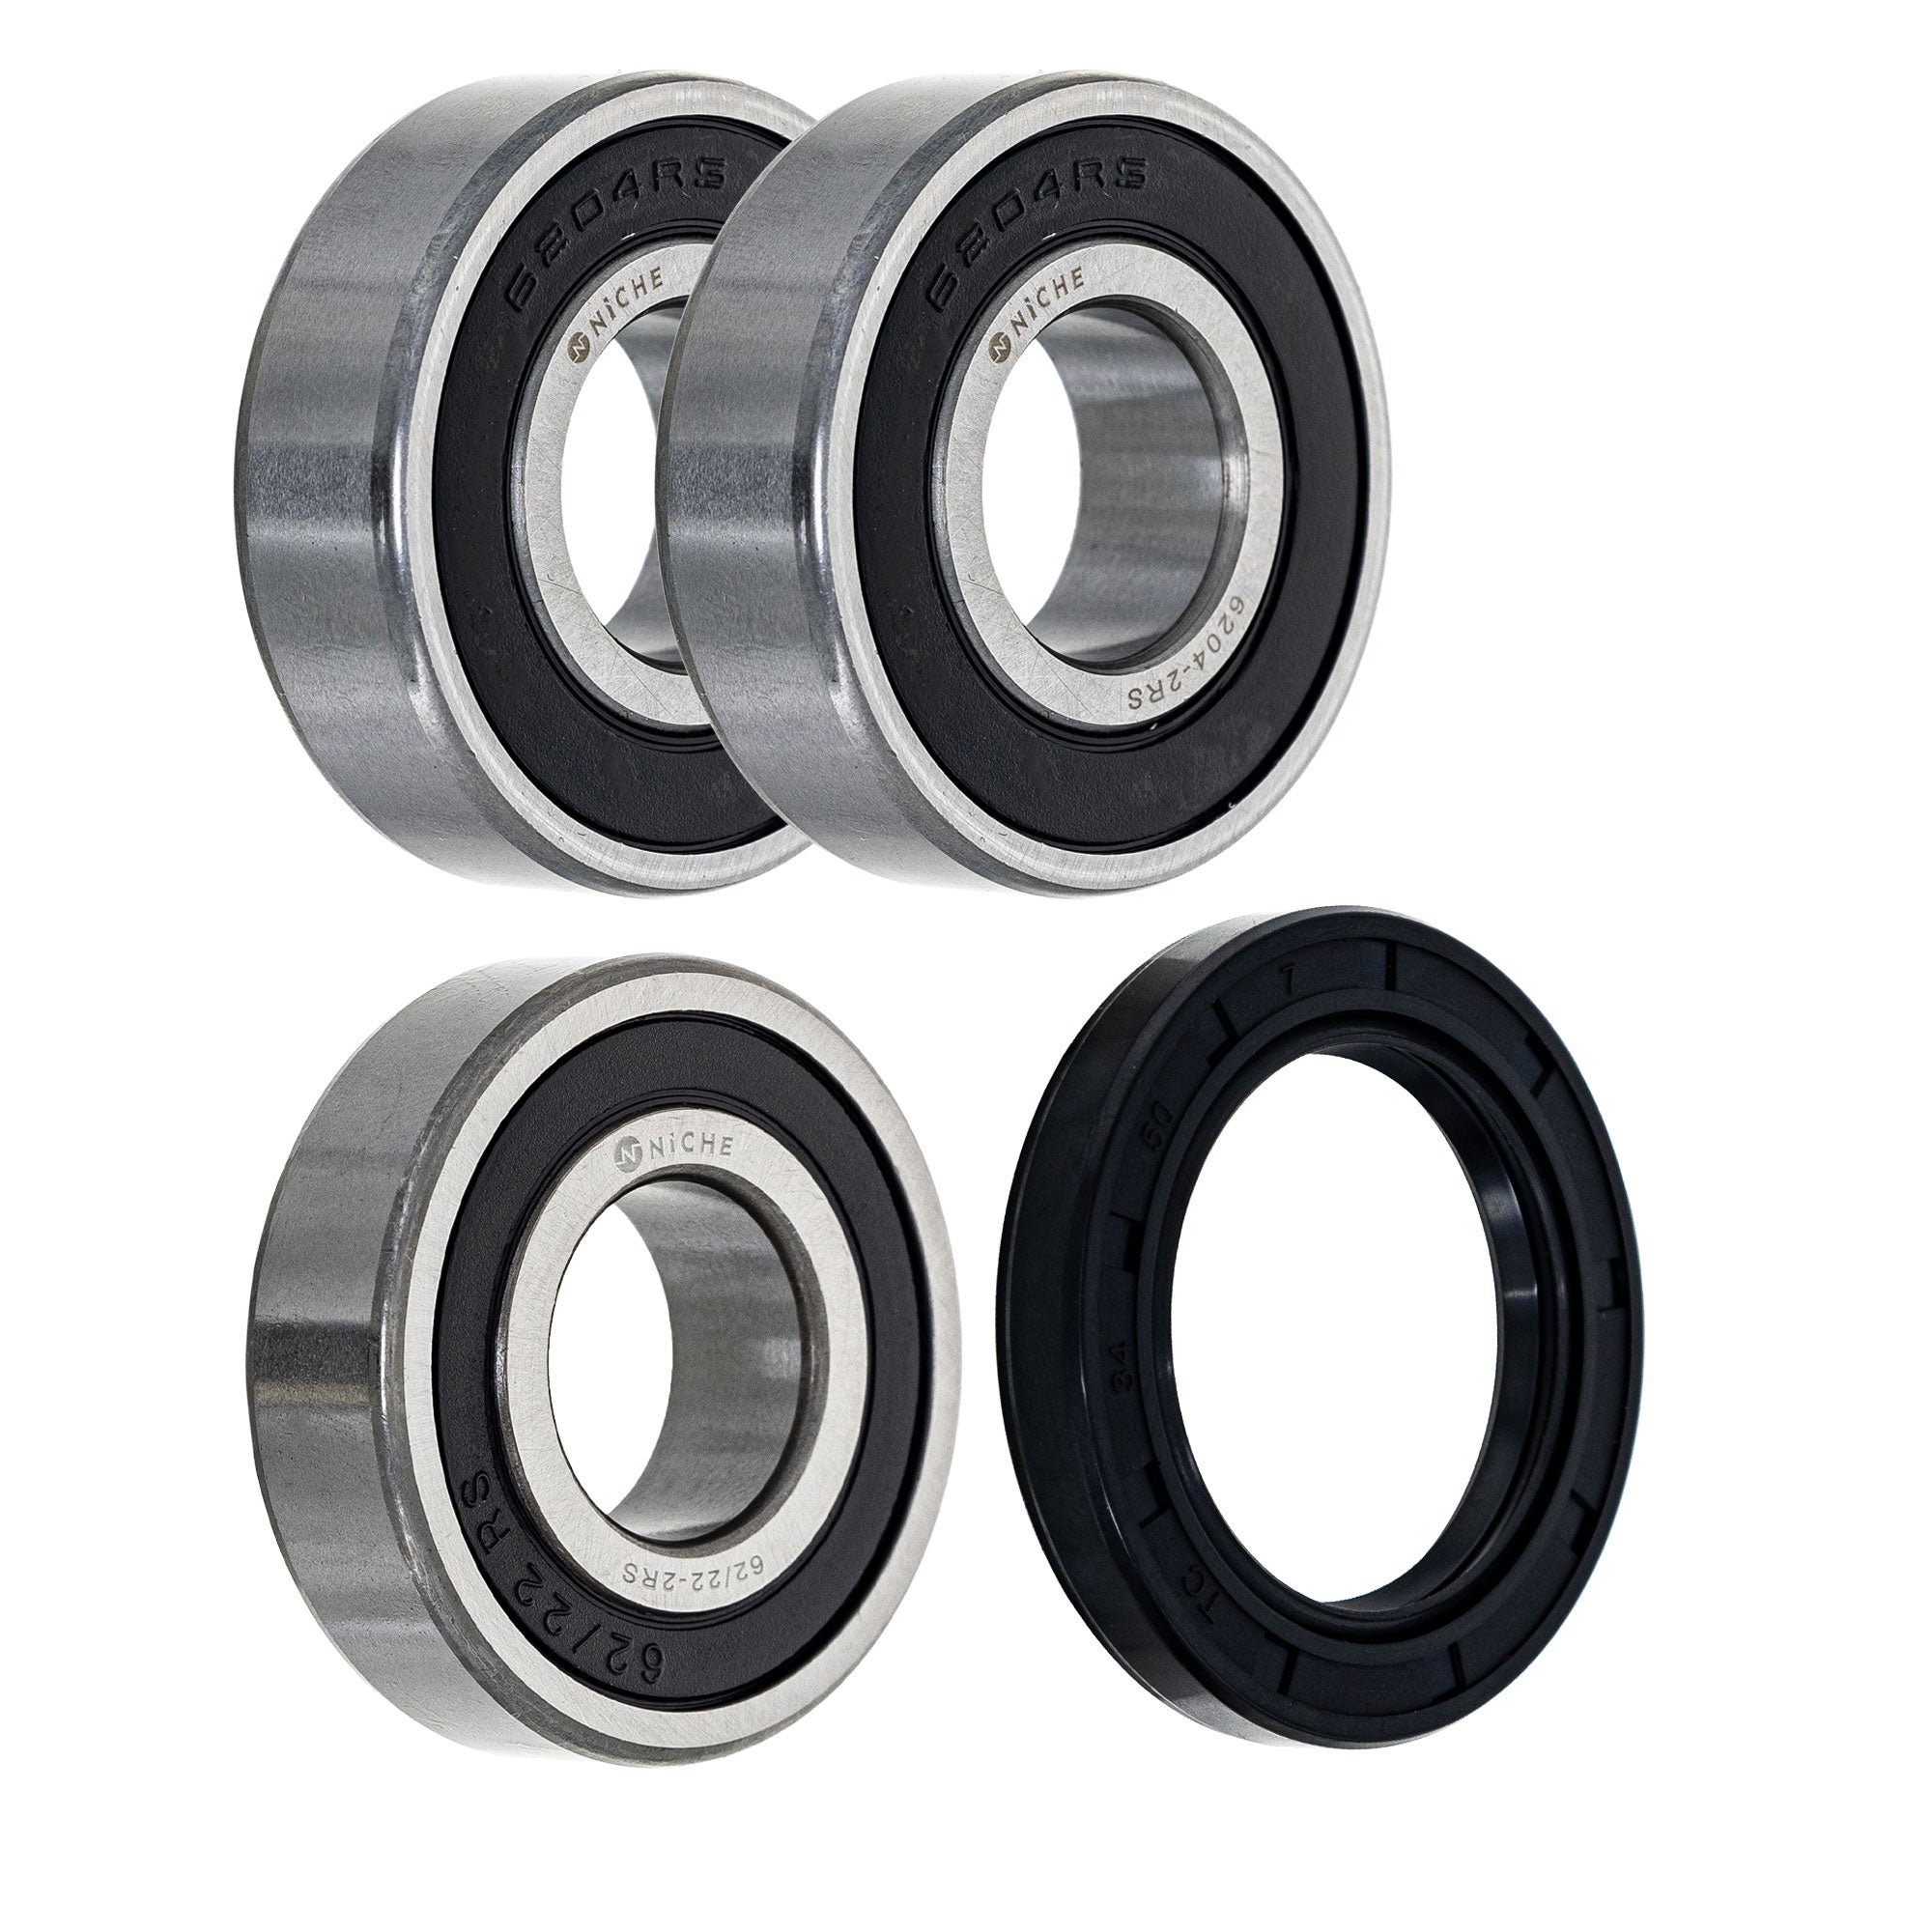 Wheel Bearing Seal Kit for zOTHER Ref No Super Shadow NICHE MK1009008